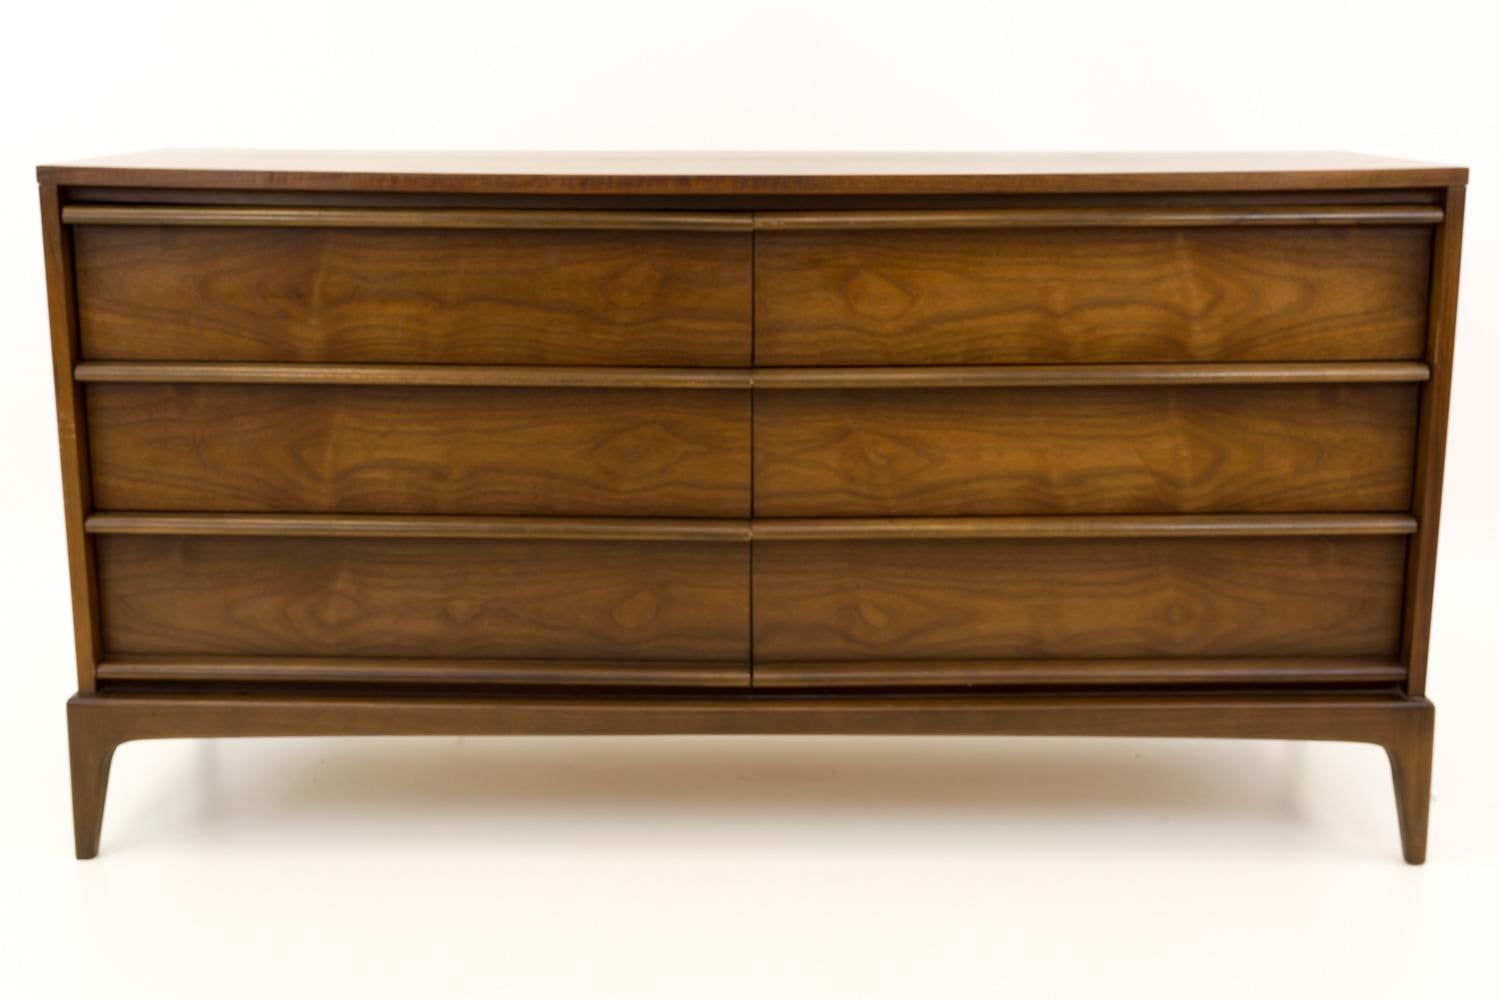 Paul McCobb style lane rhythm mid century walnut 6 drawer lowboy dresser

Dresser measures: 60 wide x 18 deep x 31.5 inches high

?All pieces of furniture can be had in what we call restored vintage condition. That means the piece is restored